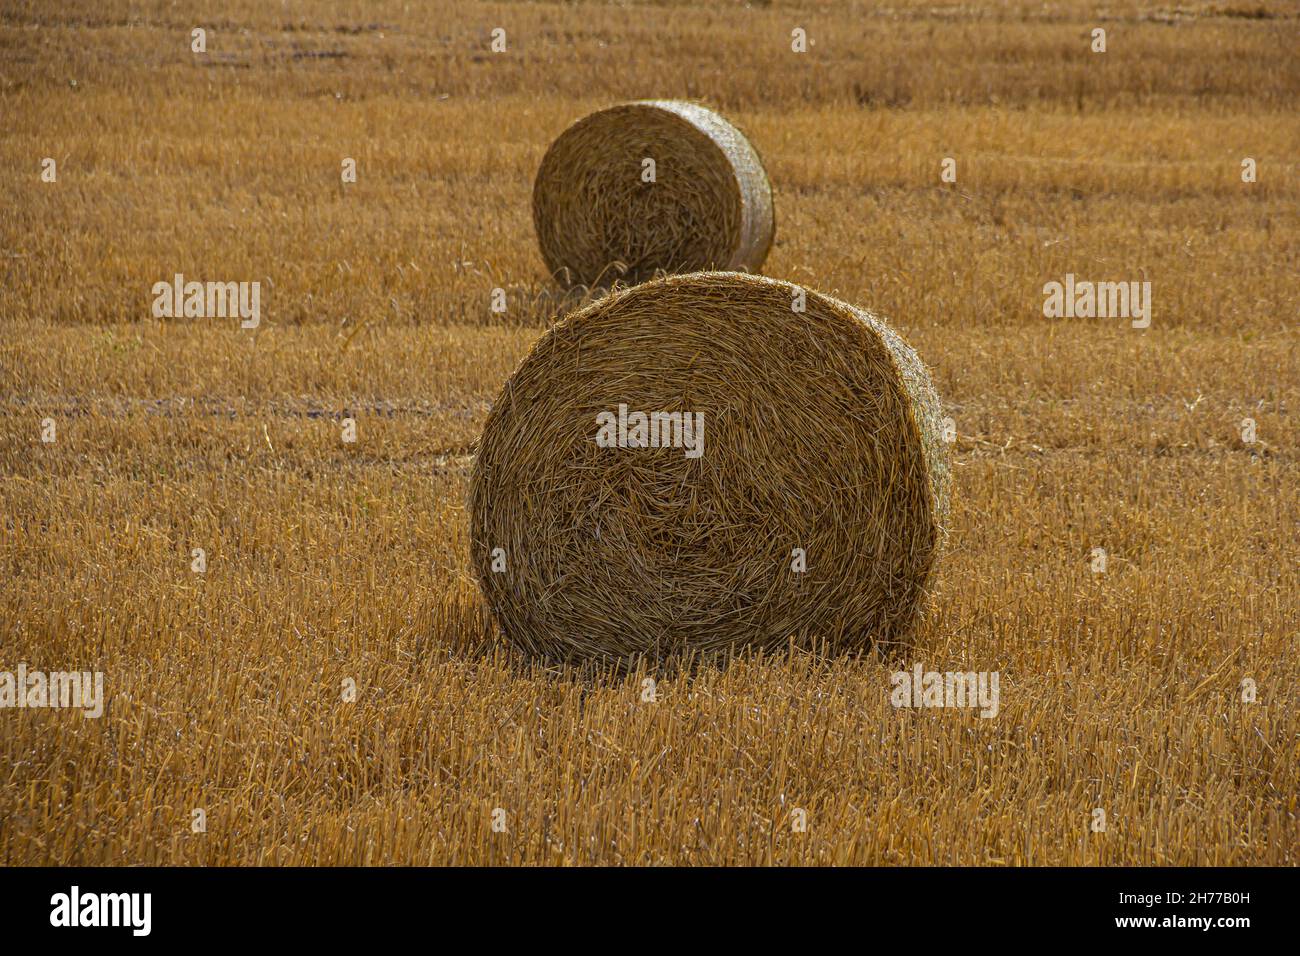 wheat hay bales in St Helena Bay, South Africa, West Coast, brown, cereals Stock Photo